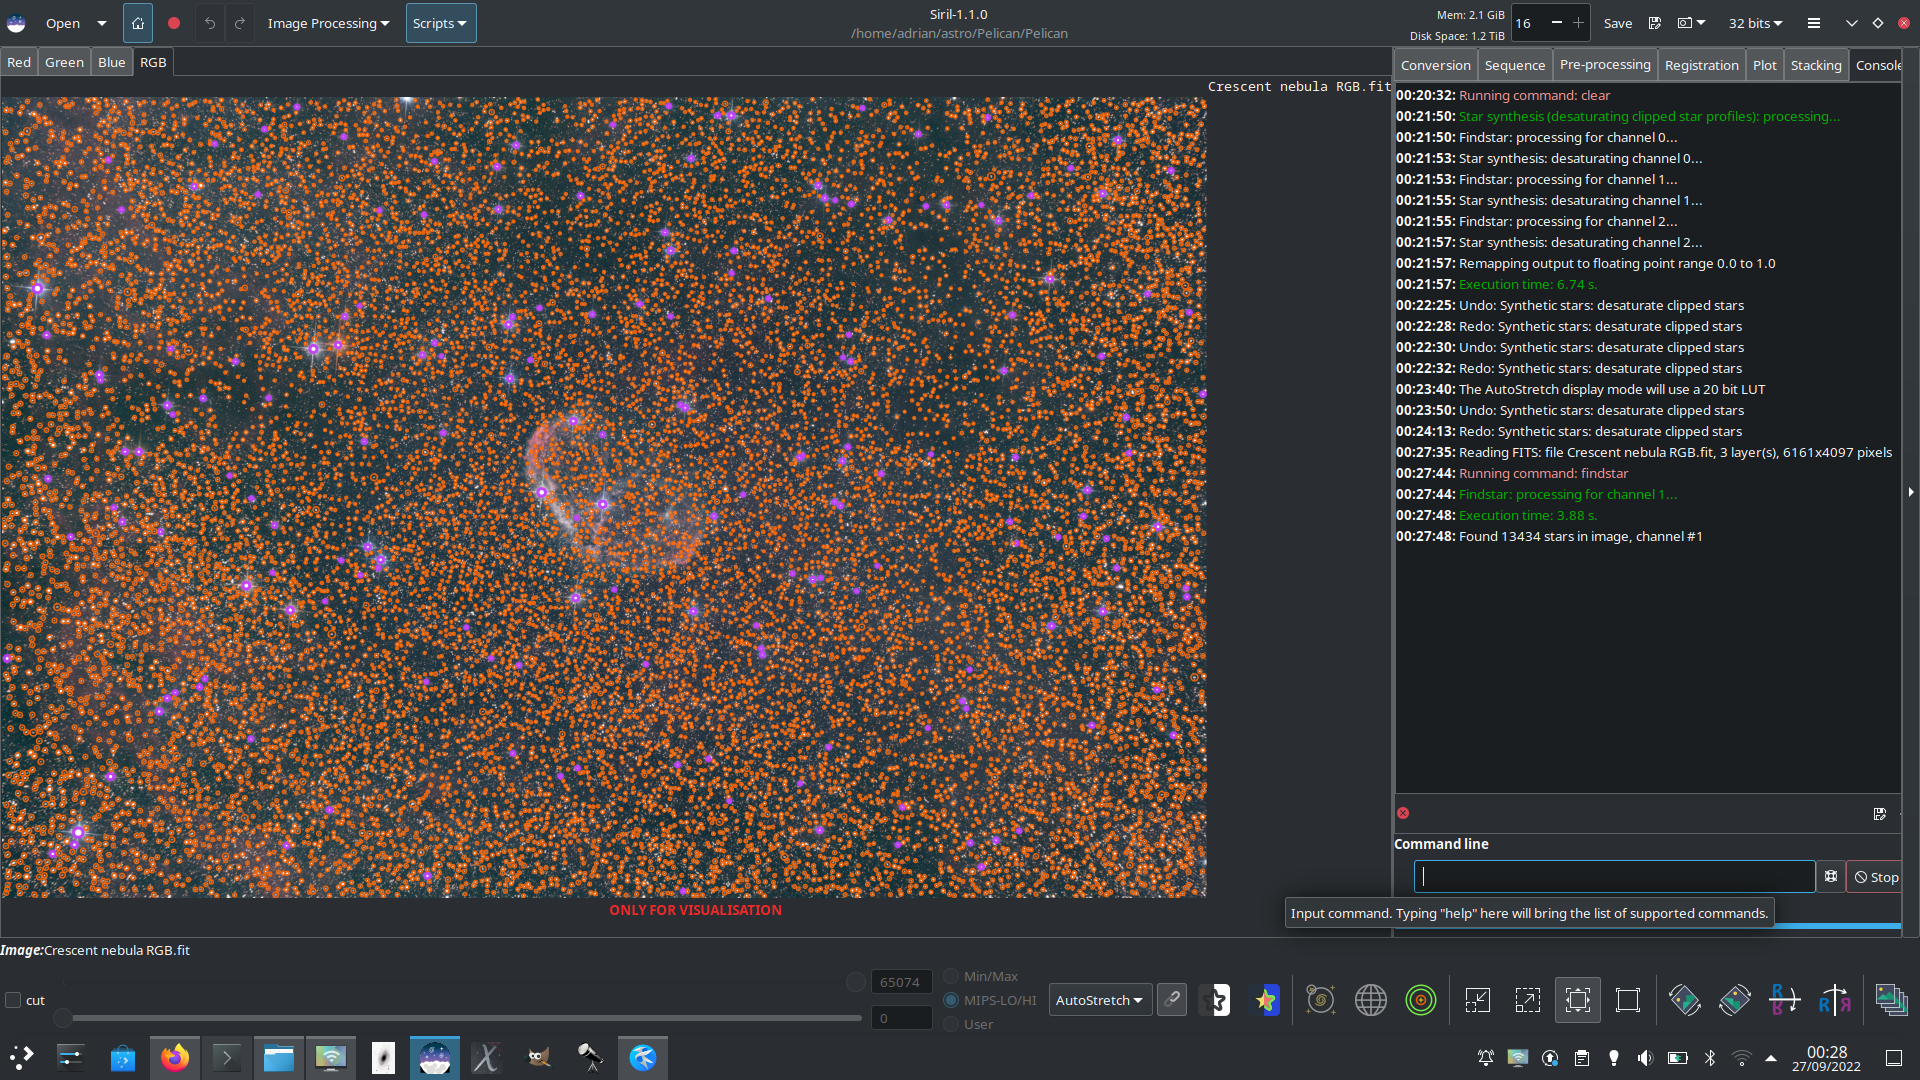 Siril is good at finding a lot of stars - over 13,000 in this image of the Crescent nebula!